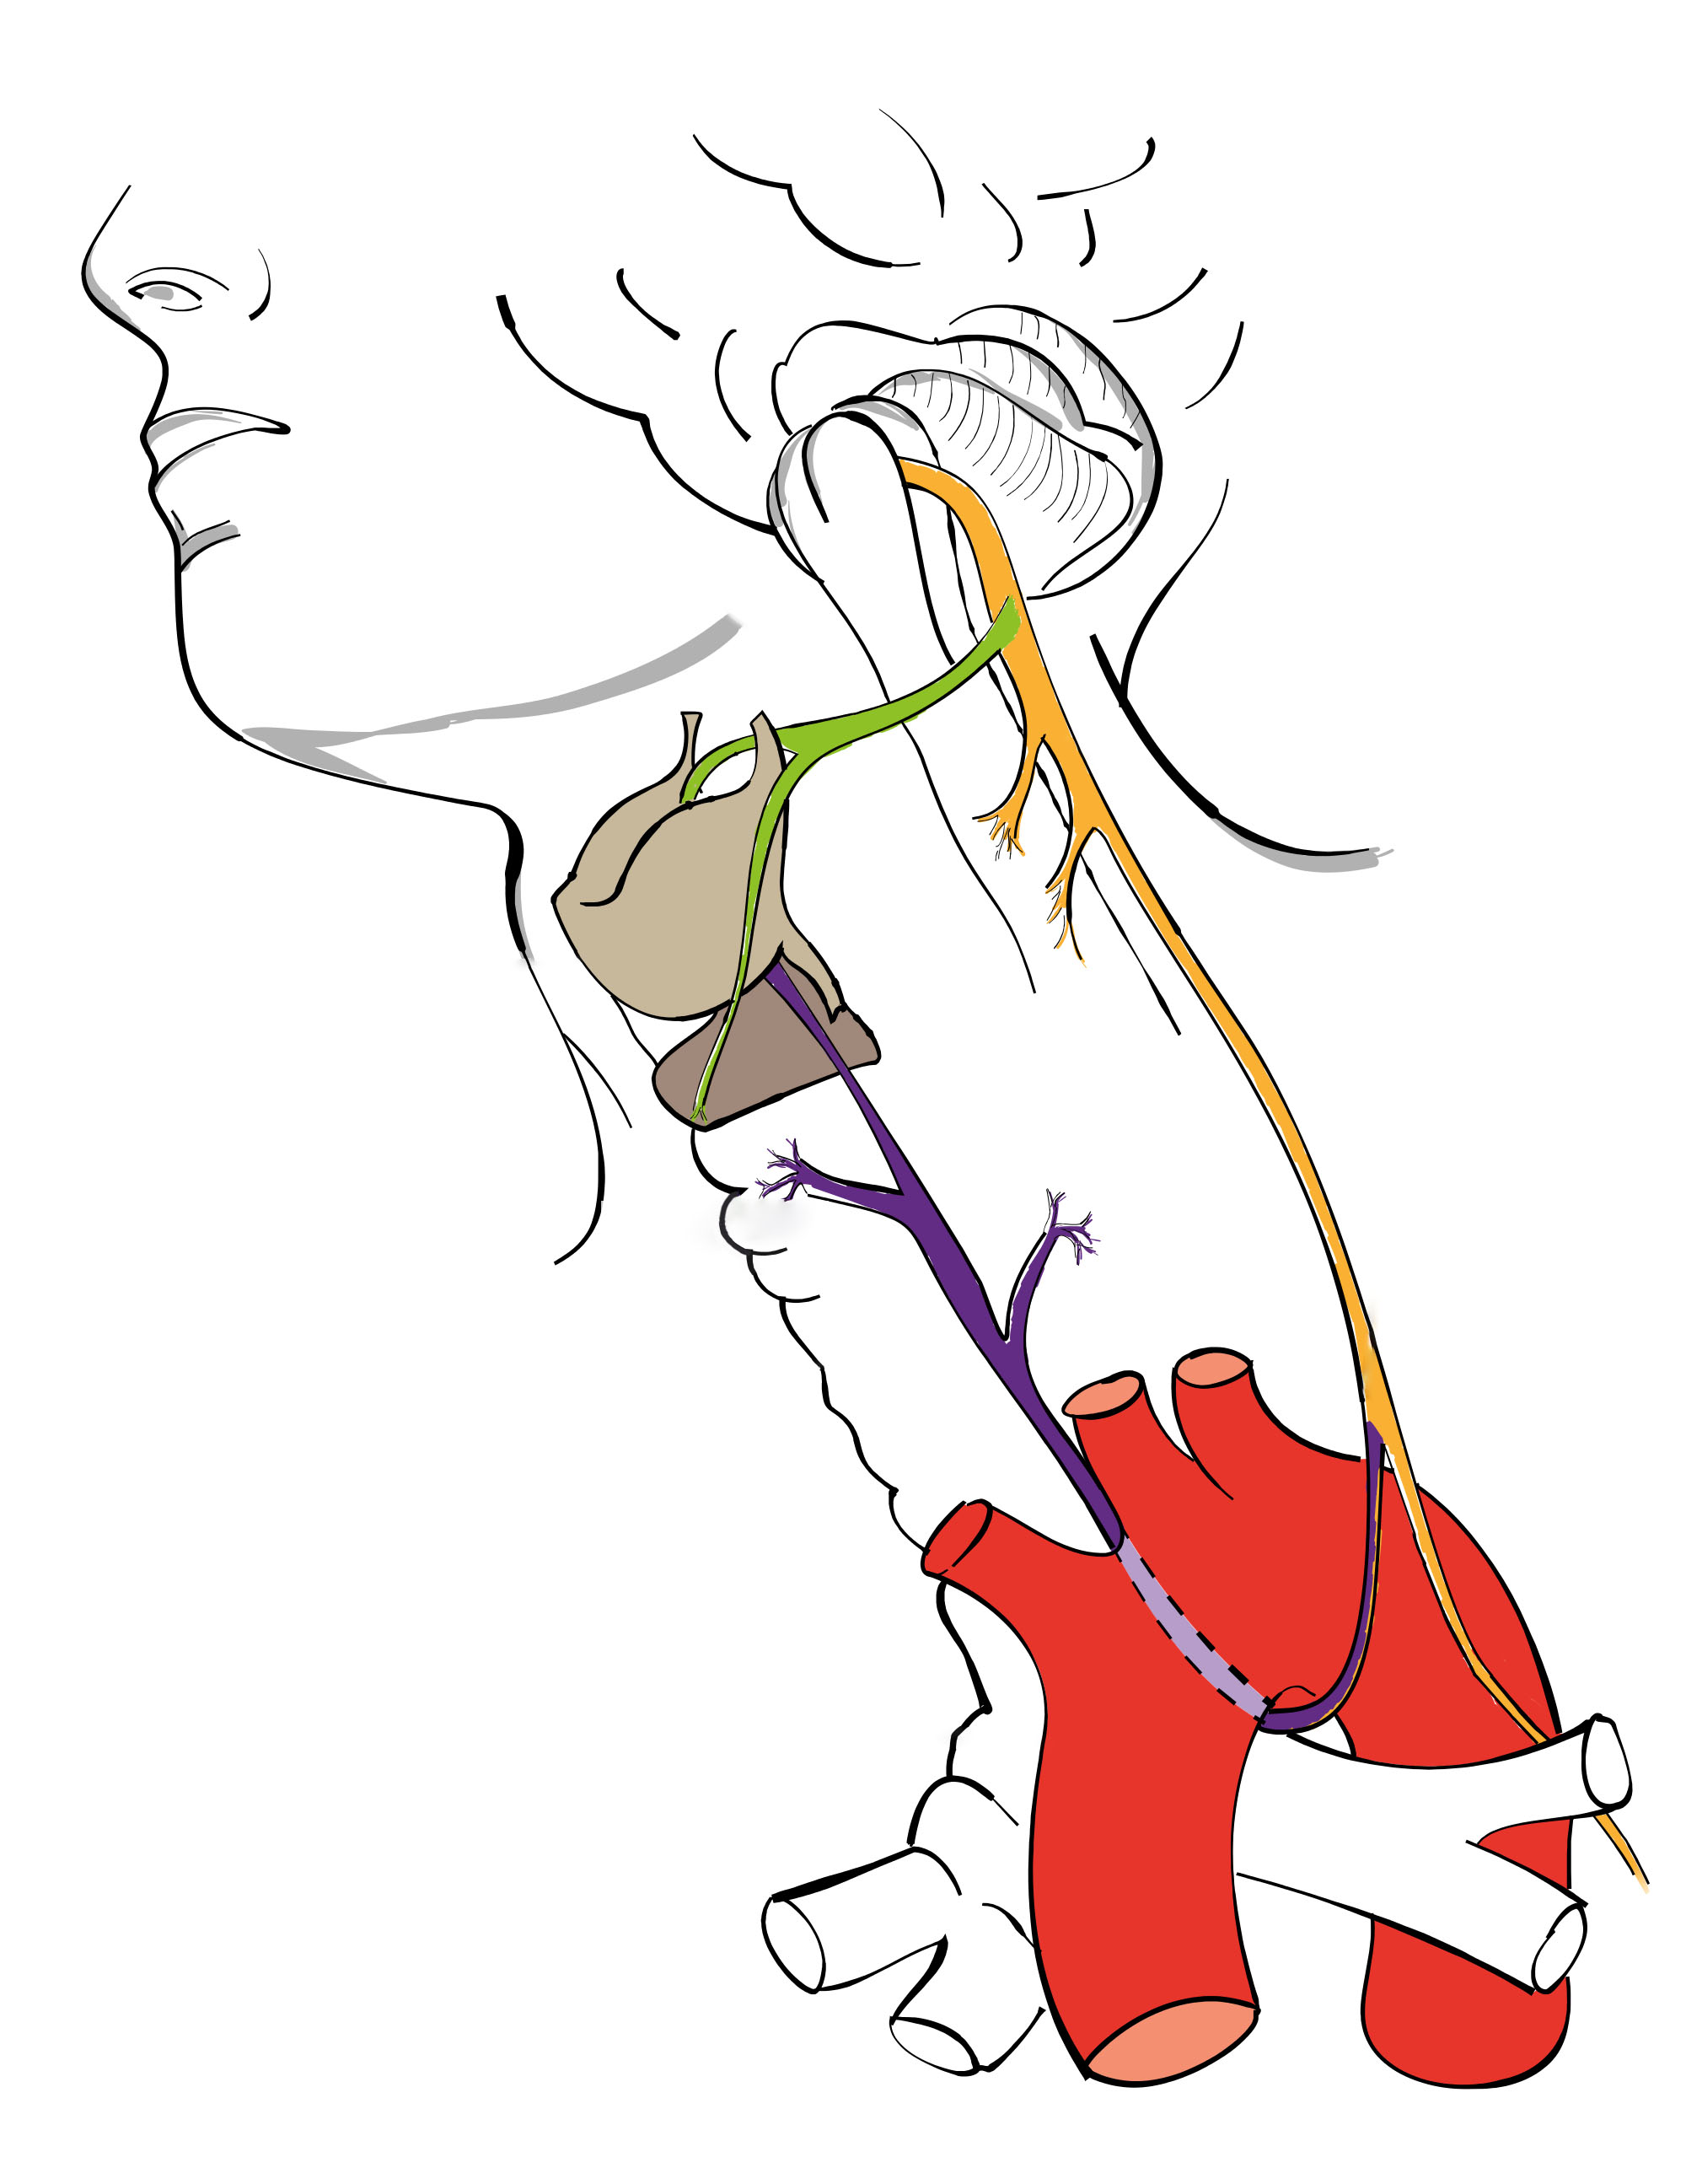 Cases and Medico-Legal Aspects Regarding Bilateral Iatrogenic Injury of the Recurrent Laryngeal Nerve